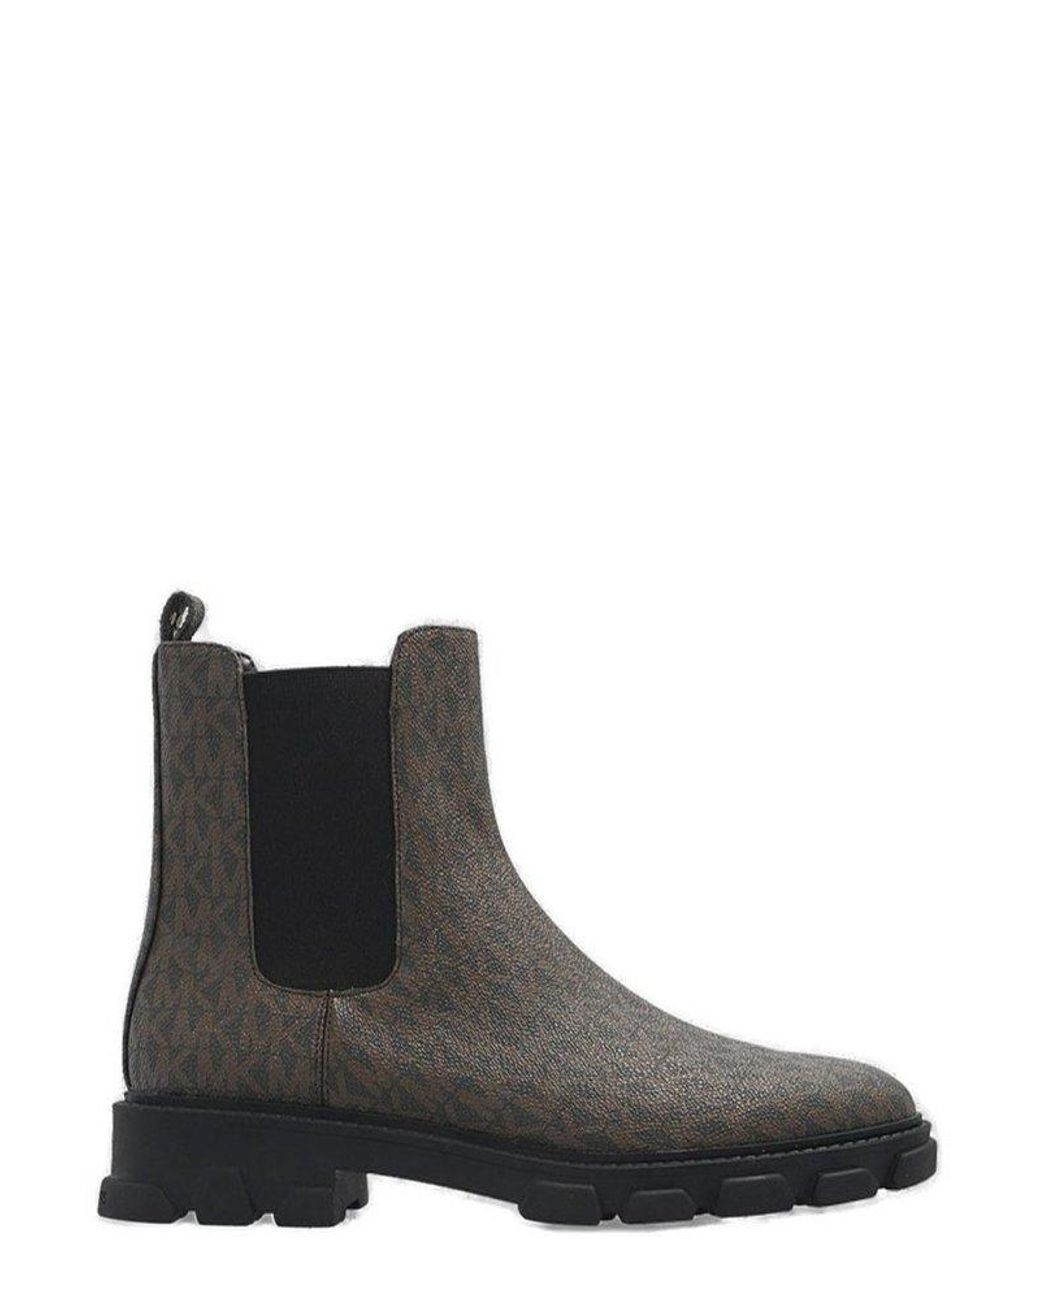 MICHAEL Michael Kors Ridley Chelsea Boots in Brown | Lyst